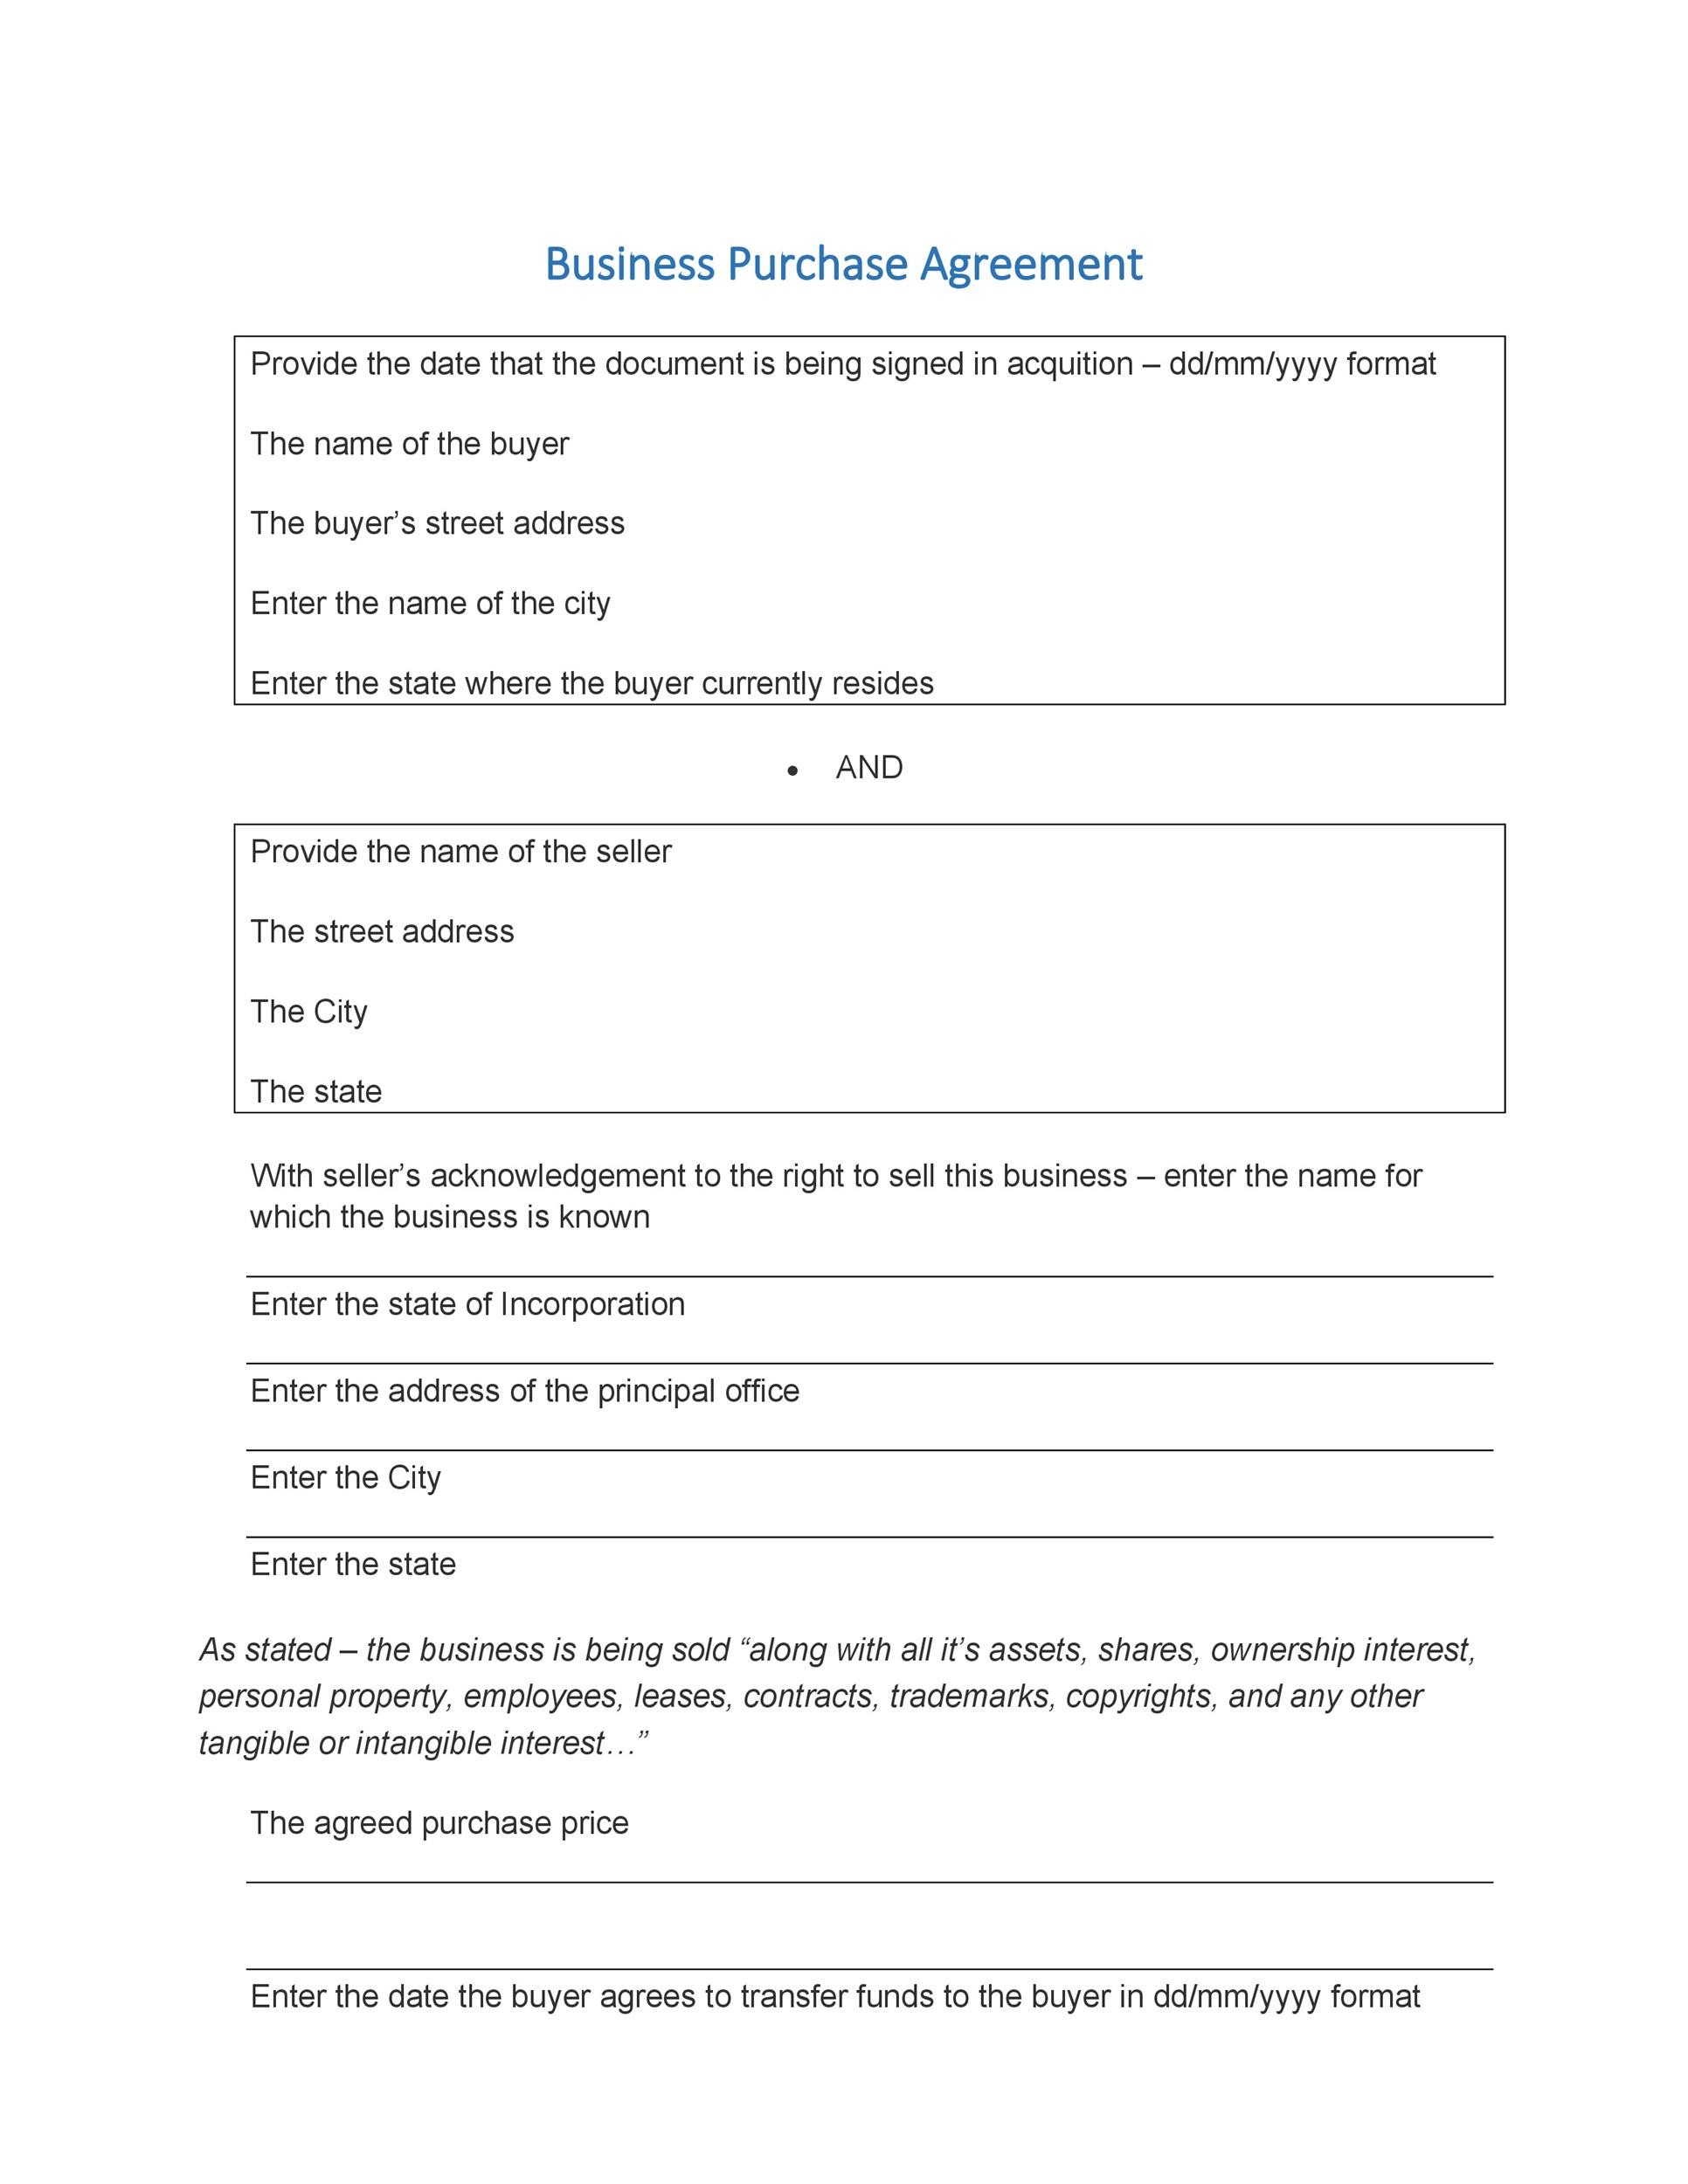 37-simple-purchase-agreement-templates-real-estate-business